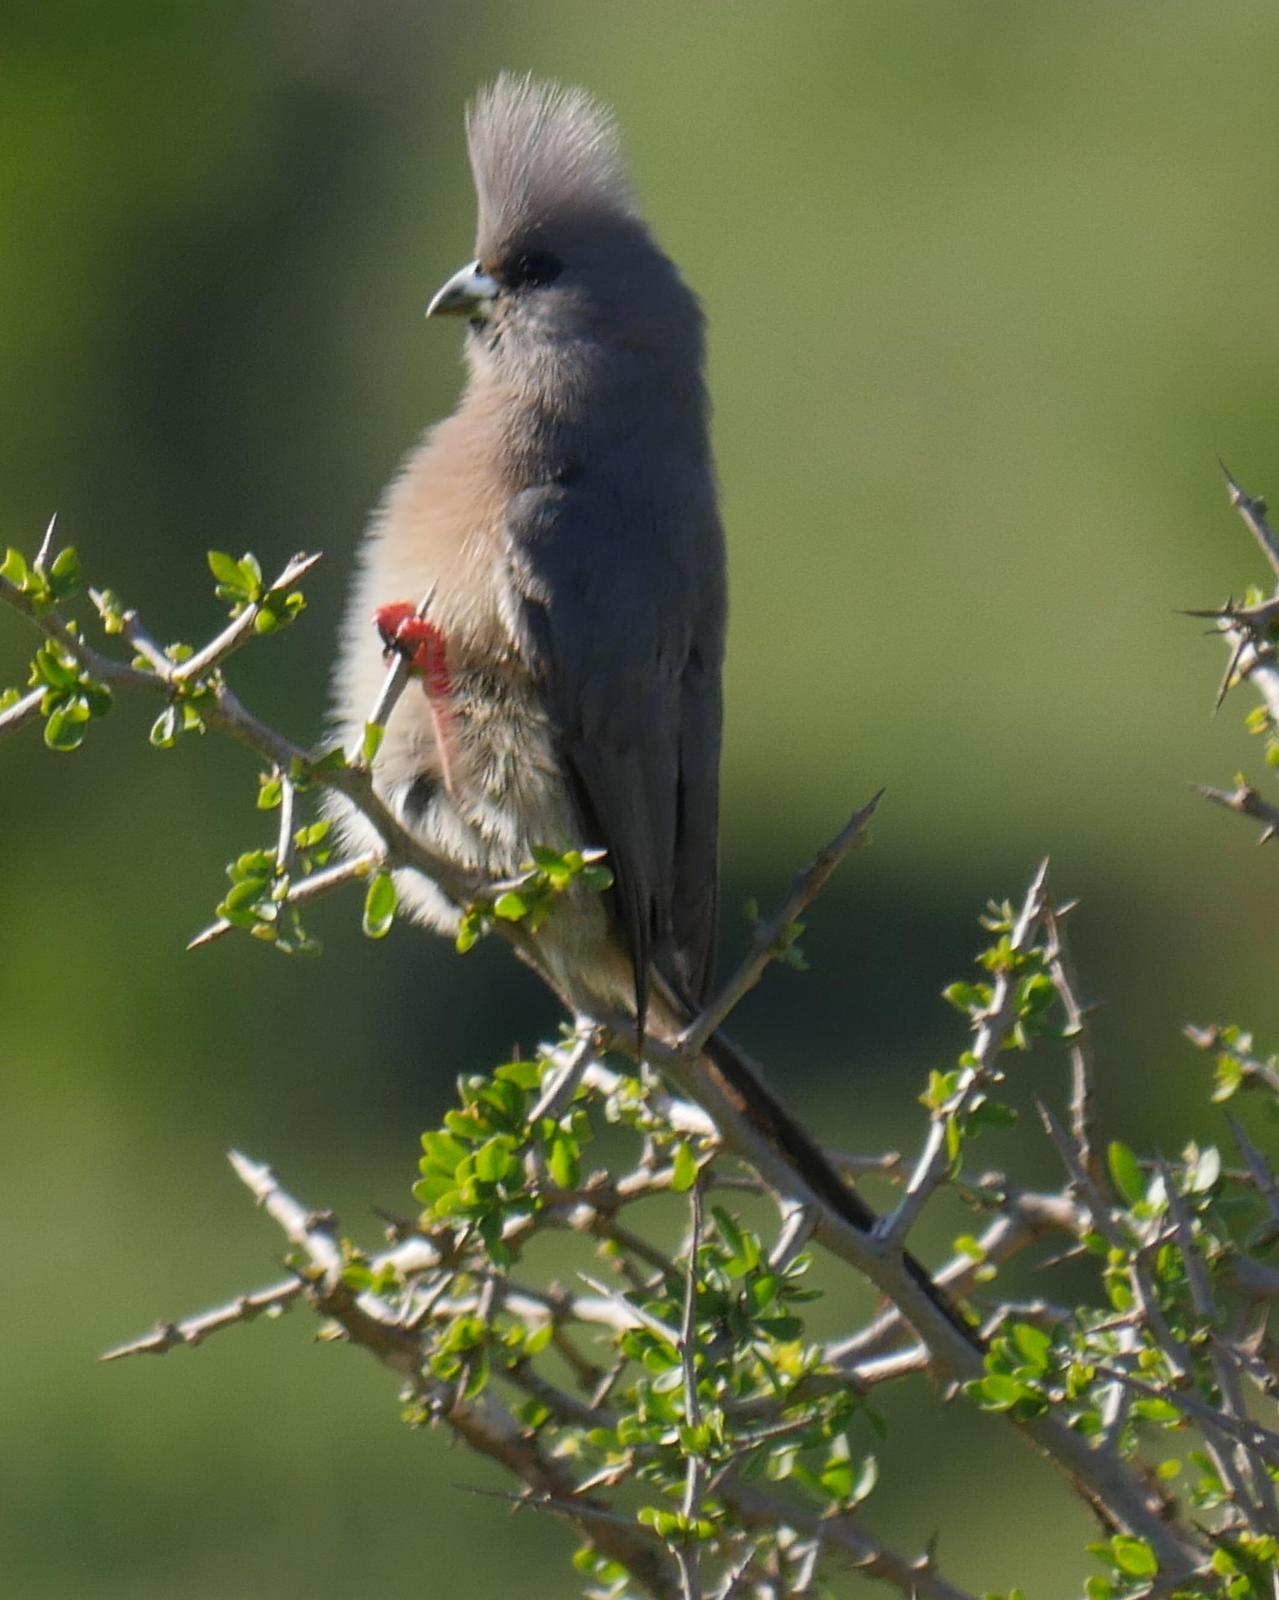 Speckled Mousebird Photo by Peter Lowe